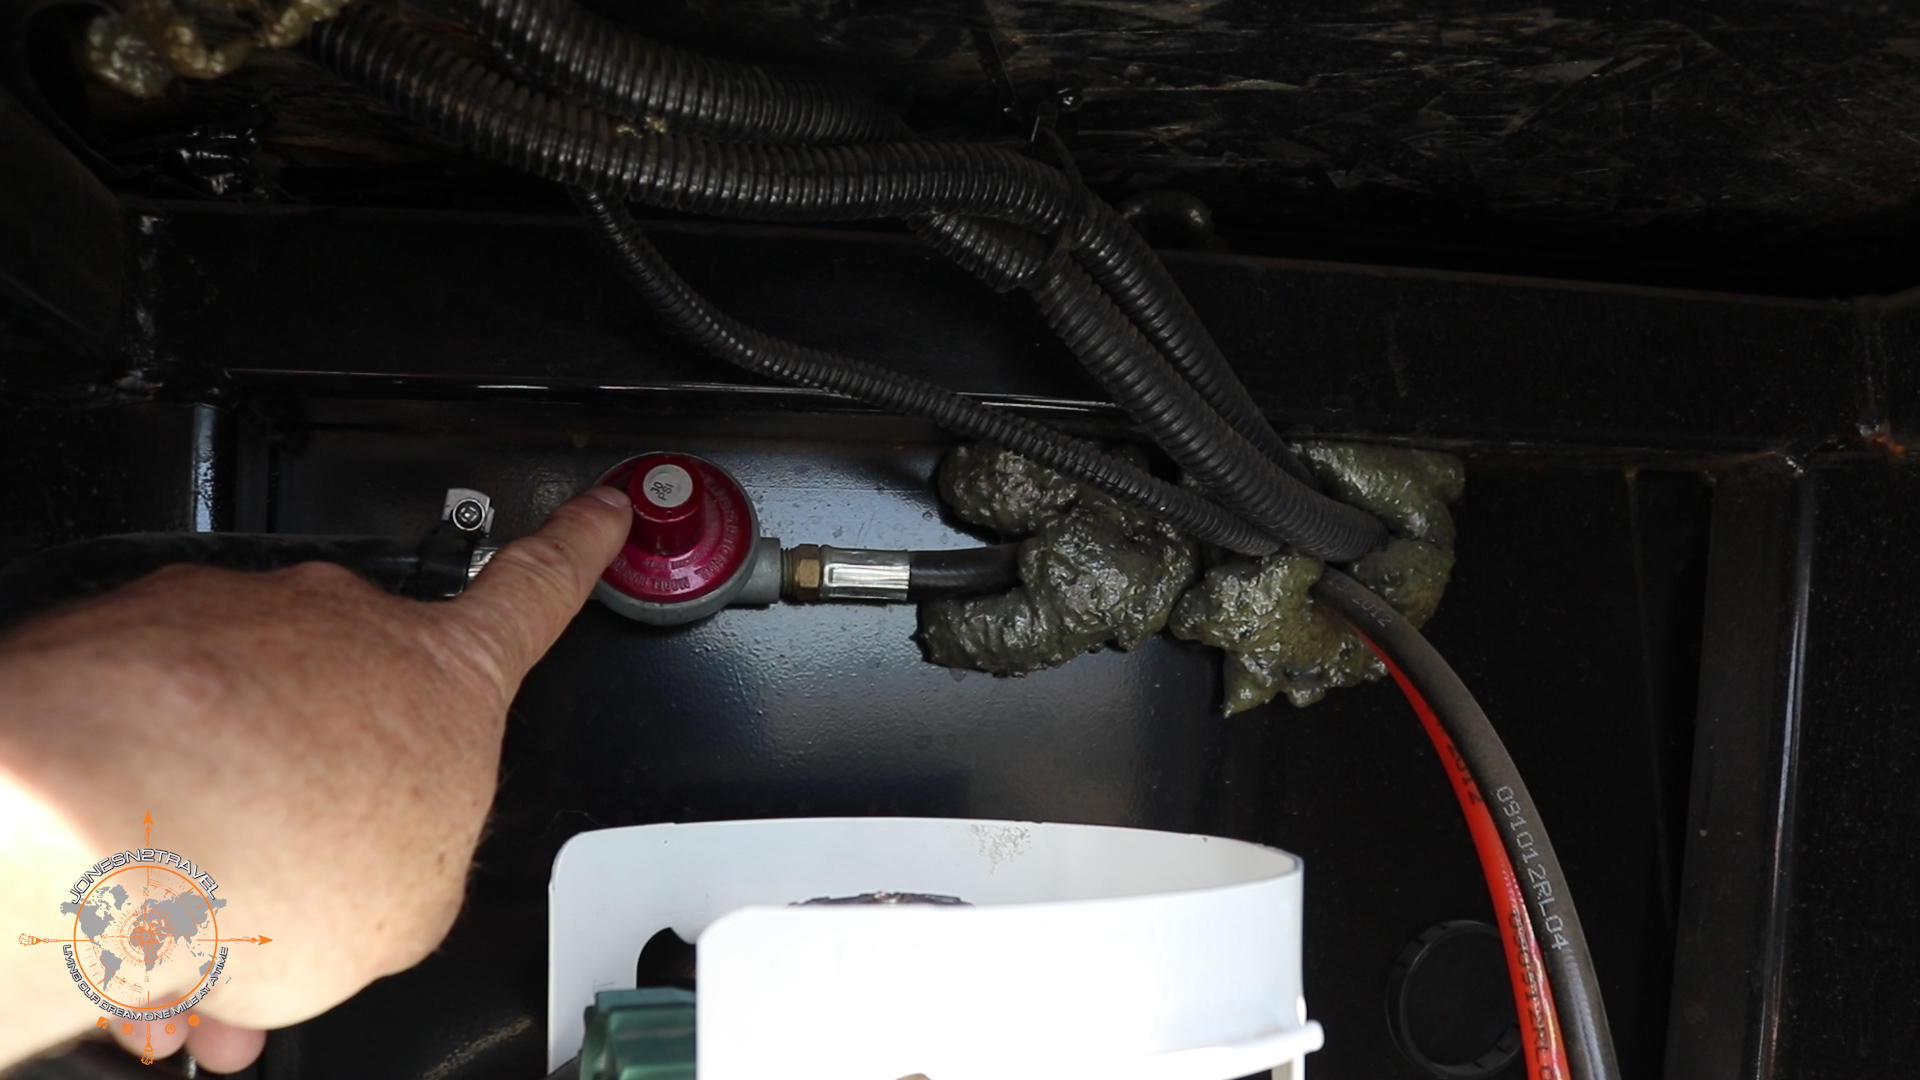 How to: Fix RV Propane System Issue